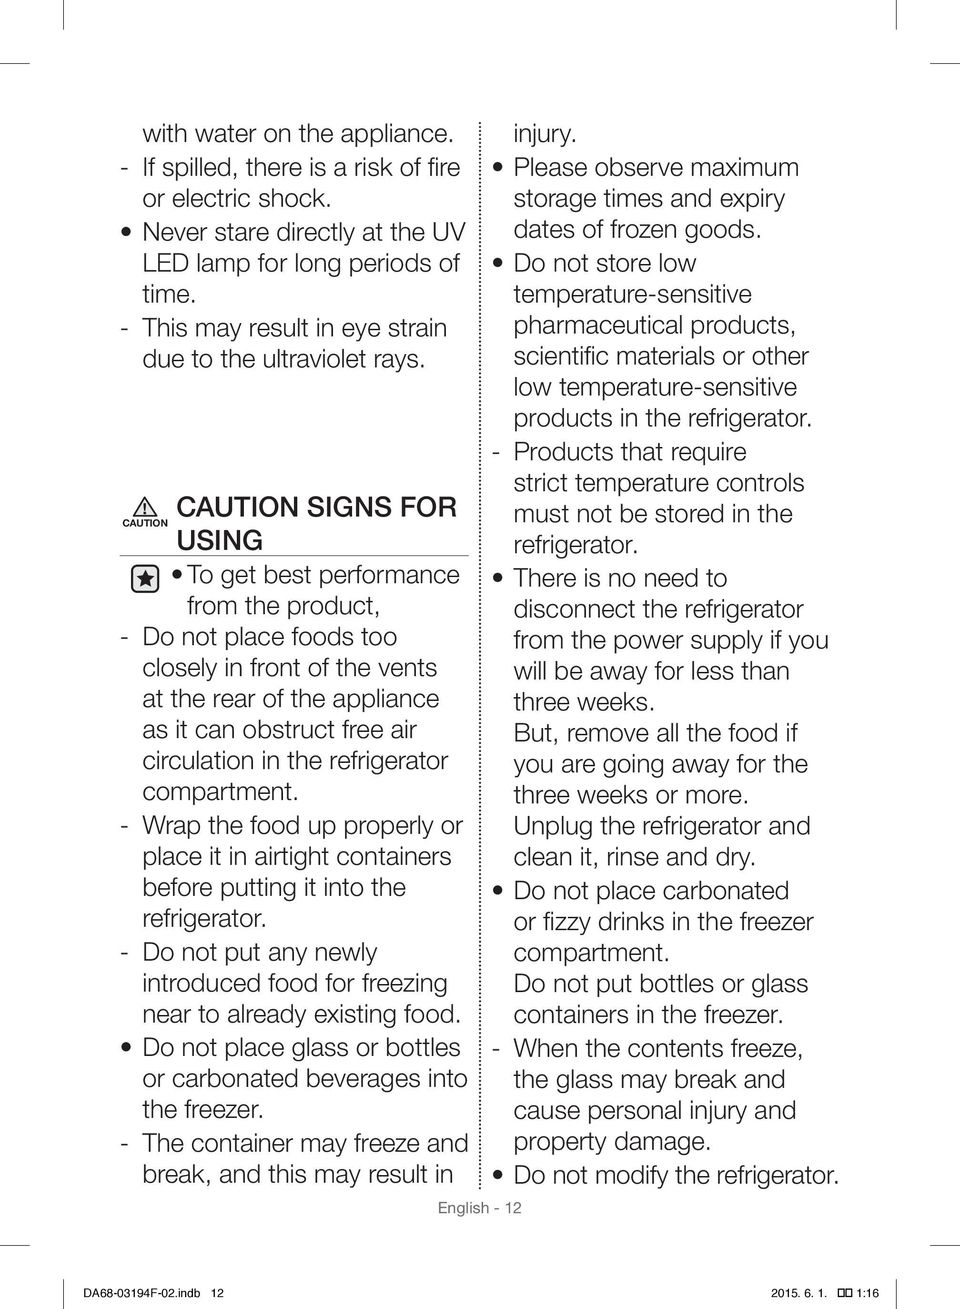 CAUTION SIGNS FOR CAUTION USING To get best performance from the product, Do not place foods too closely in front of the vents at the rear of the appliance as it can obstruct free air circulation in